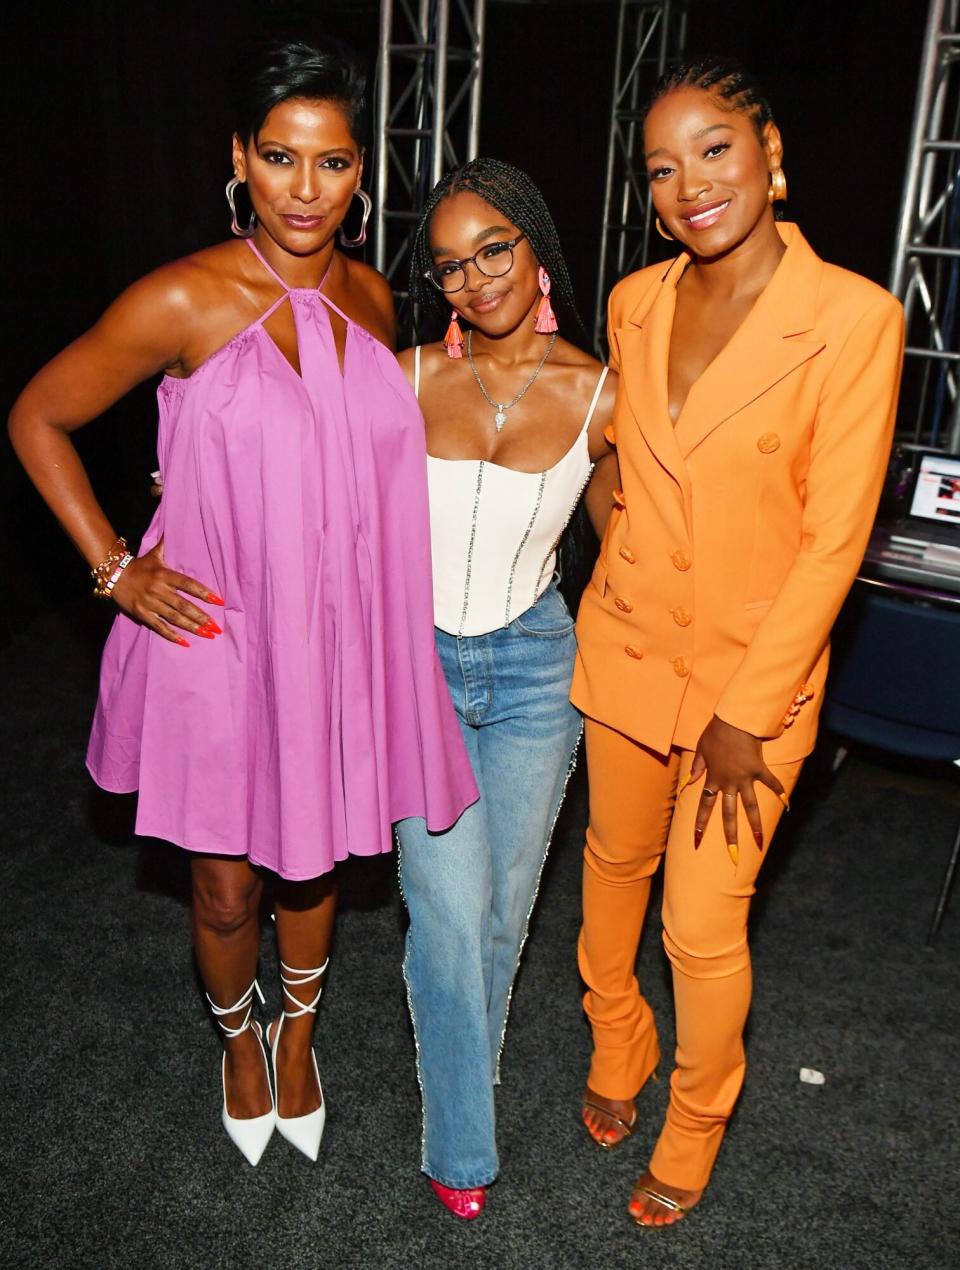 NEW ORLEANS, LOUISIANA - JULY 01: (L-R) Tamron Hall, Marsai Martin and KeKe Palmer attend the 2022 Essence Festival of Culture at the Ernest N. Morial Convention Center on July 1, 2022 in New Orleans, Louisiana. (Photo by Paras Griffin/Getty Images for Essence)